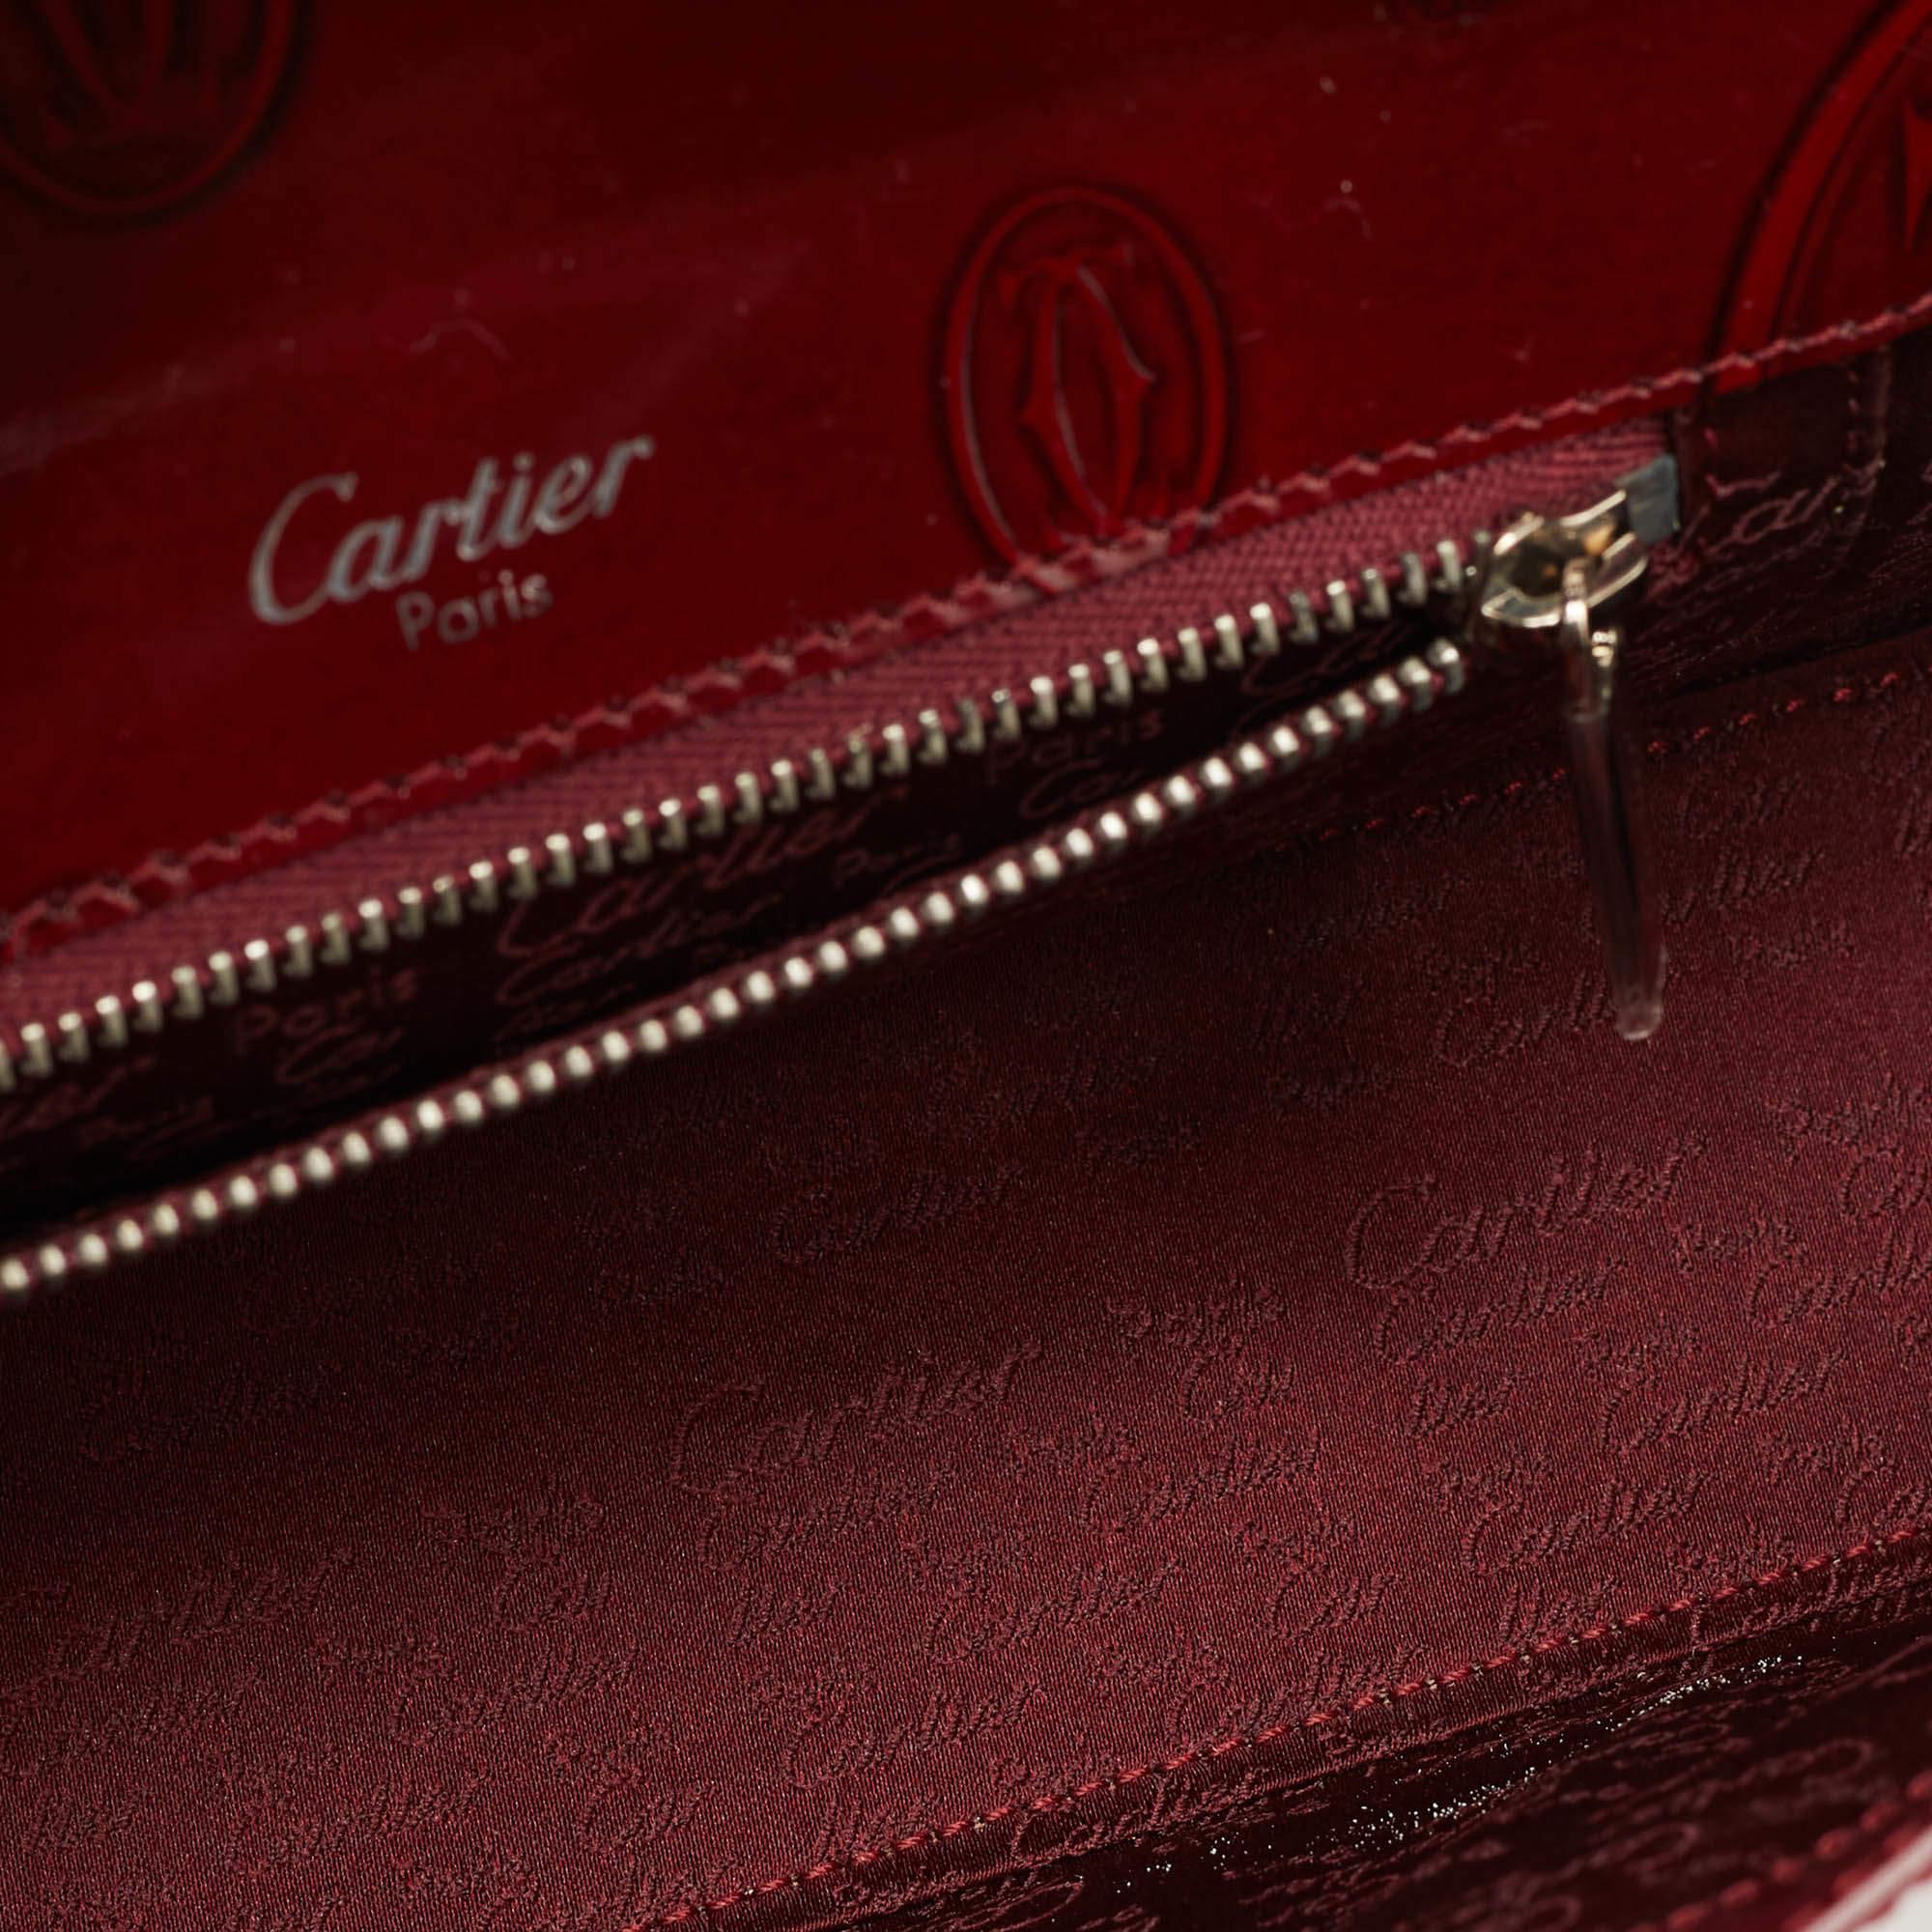 Cartier Red Gloss Leather Happy Birthday Cabochon Shoulder Bag 10